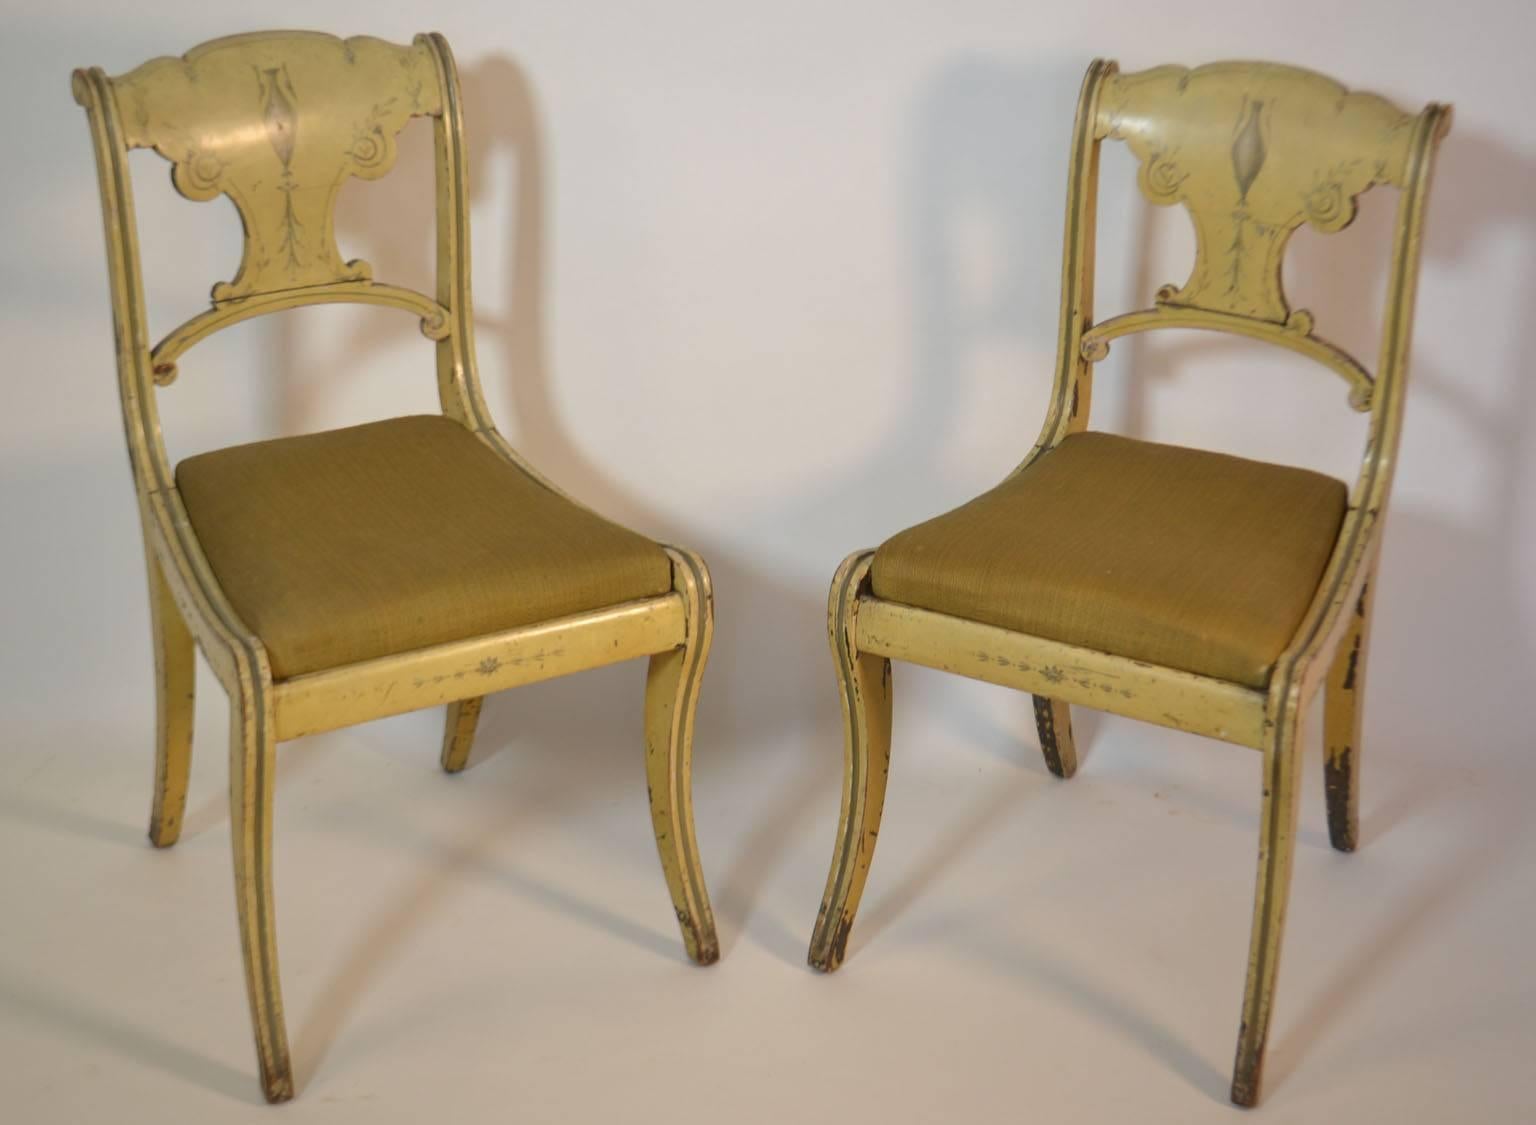 Set of four small painted chairs with mustard colored paint.